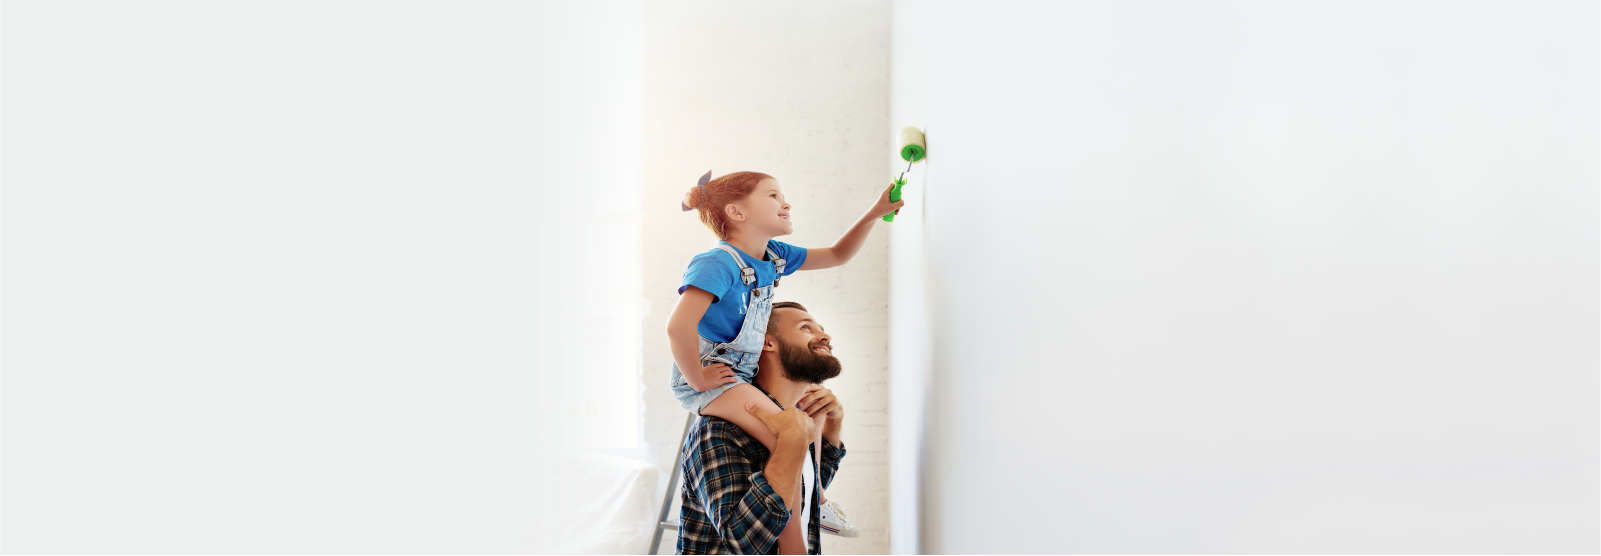 Girl on father's shoulders painting a wall. 